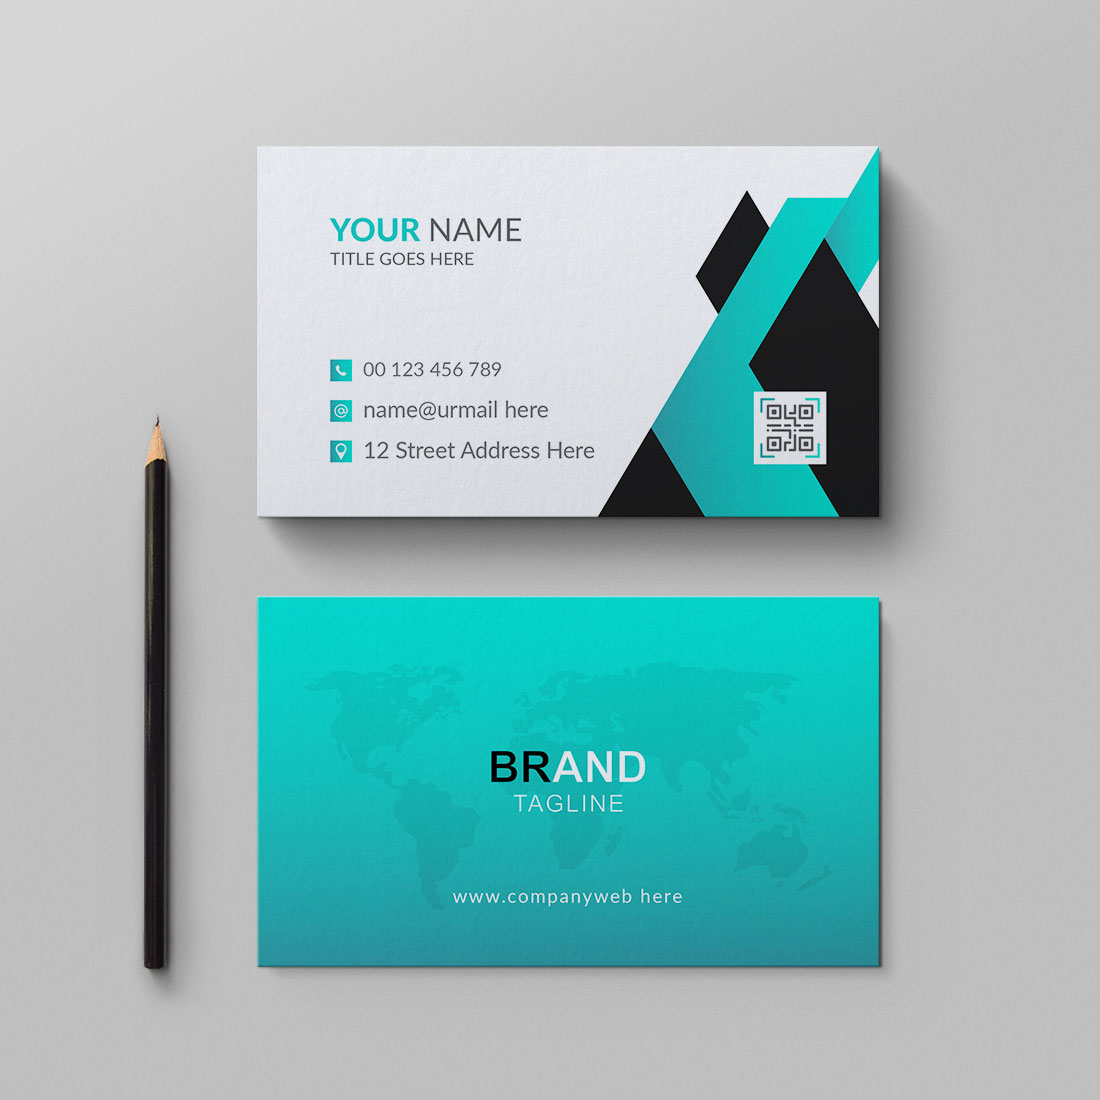 Business card design template cover image.